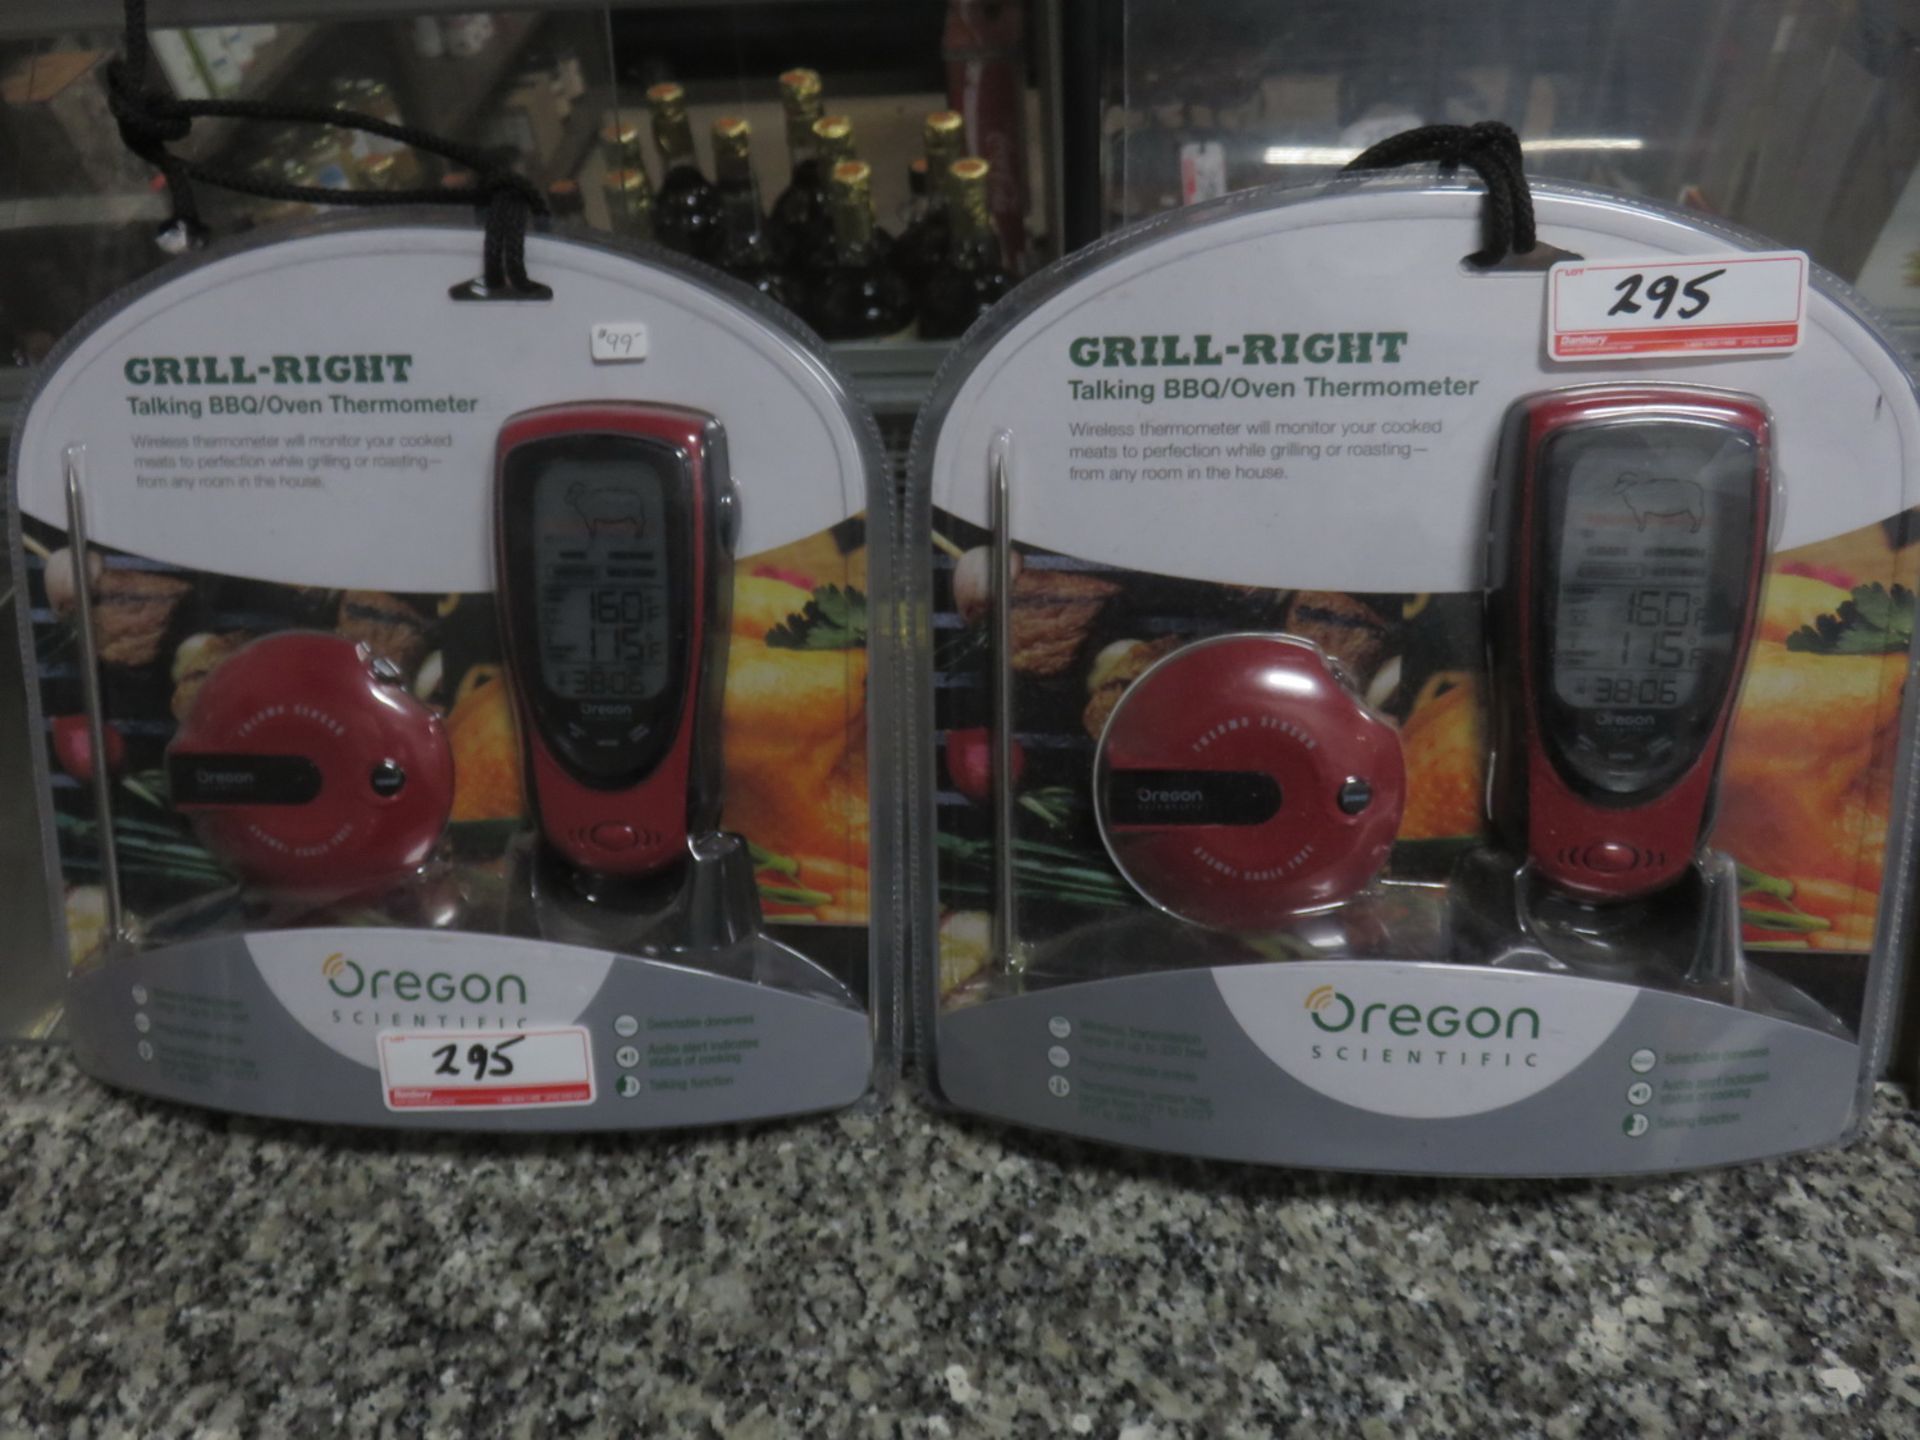 UNITS - OREGON GRILL-RIGHT WIRELESS THERMOMETERS